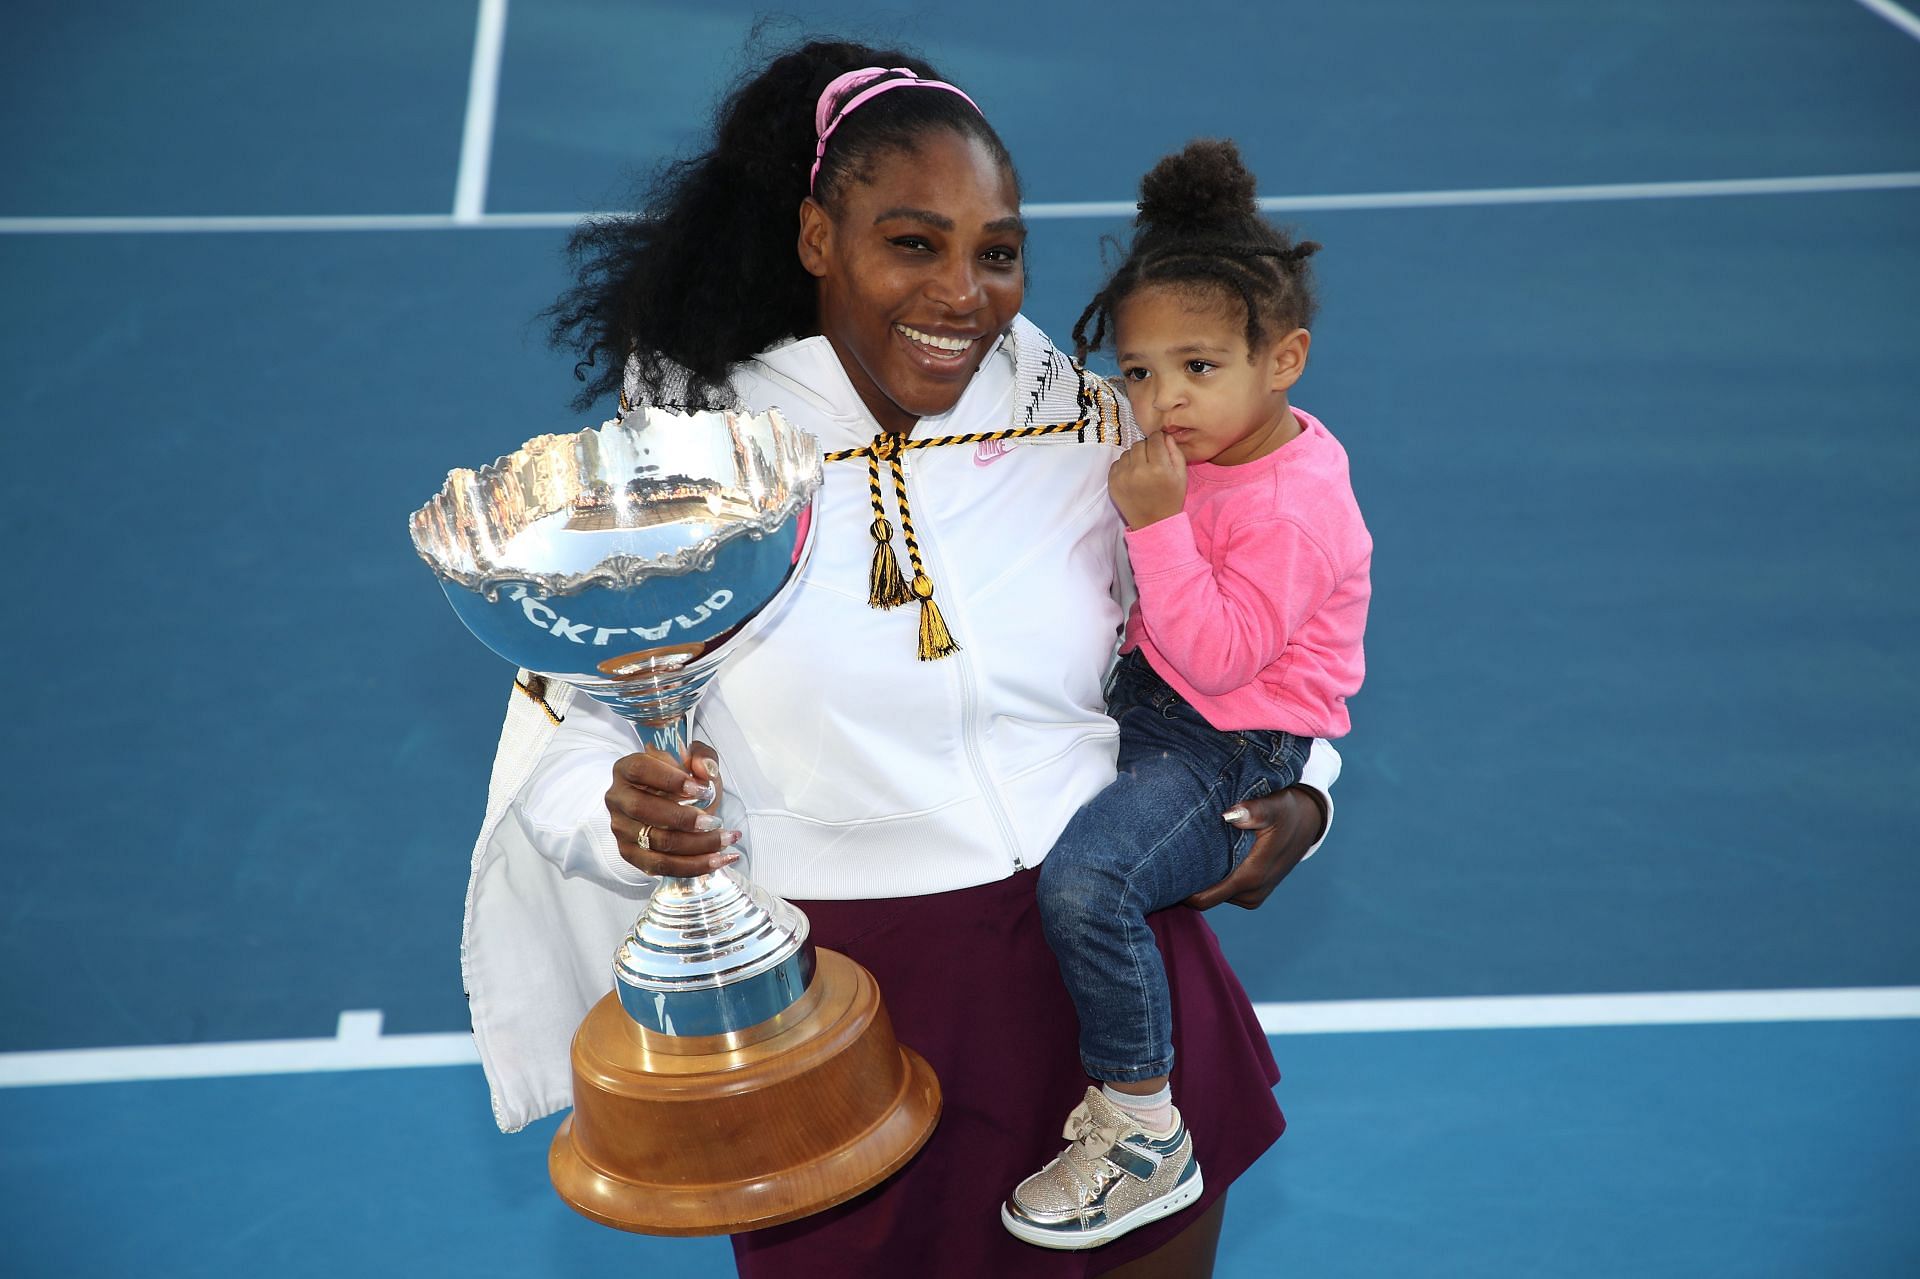 Serena Williams has said that she would love to have more kids in the future